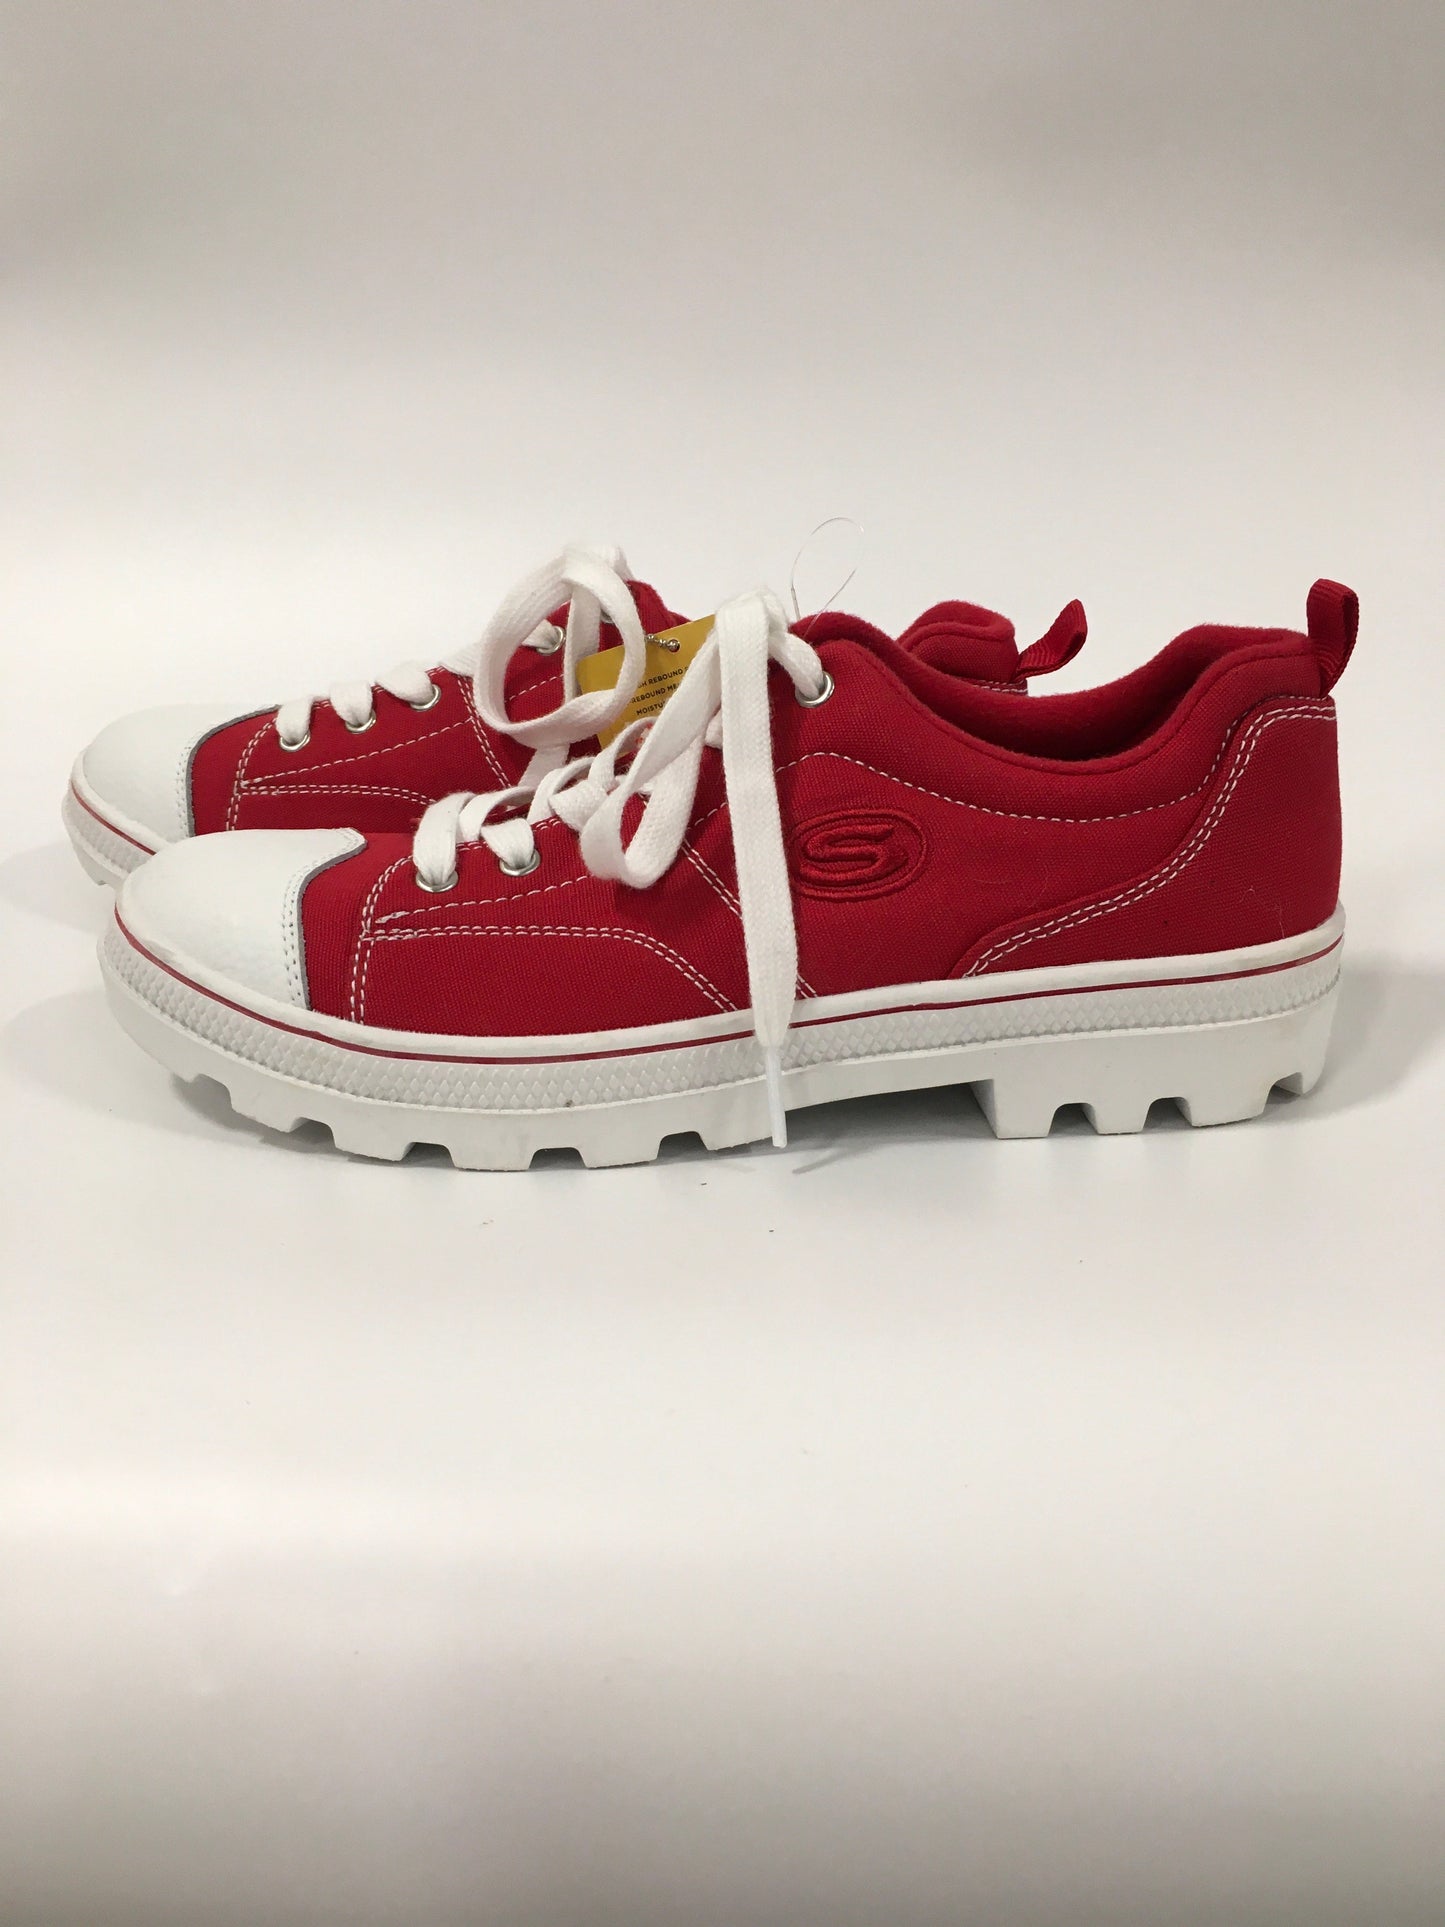 Red Shoes Athletic Skechers, Size 8.5